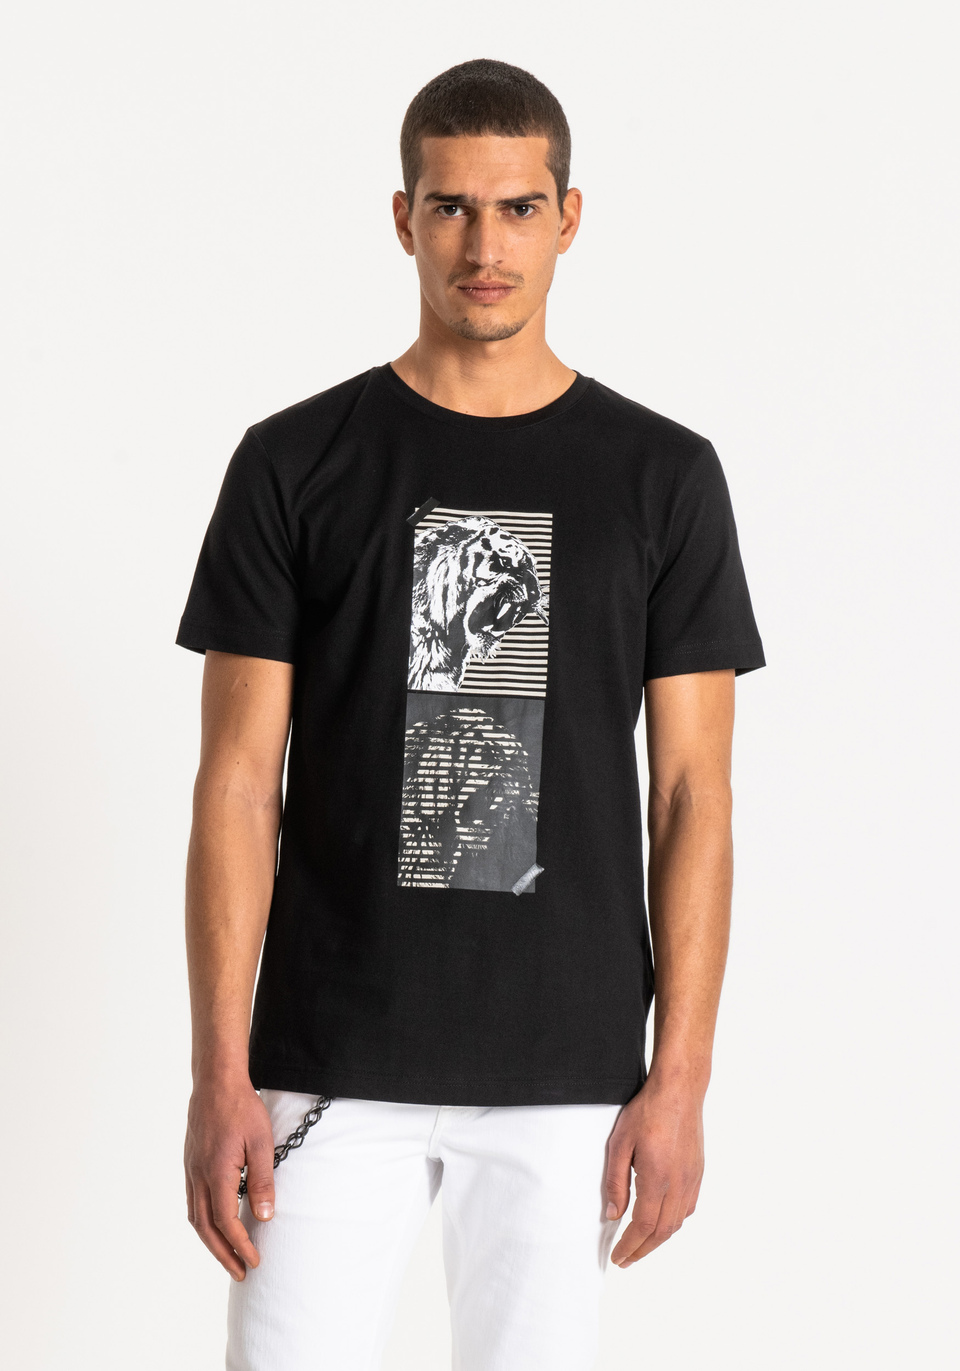 SLIM-FIT T-SHIRT IN 100% COTTON WITH A PRINT AT FRONT - Antony Morato Online Shop